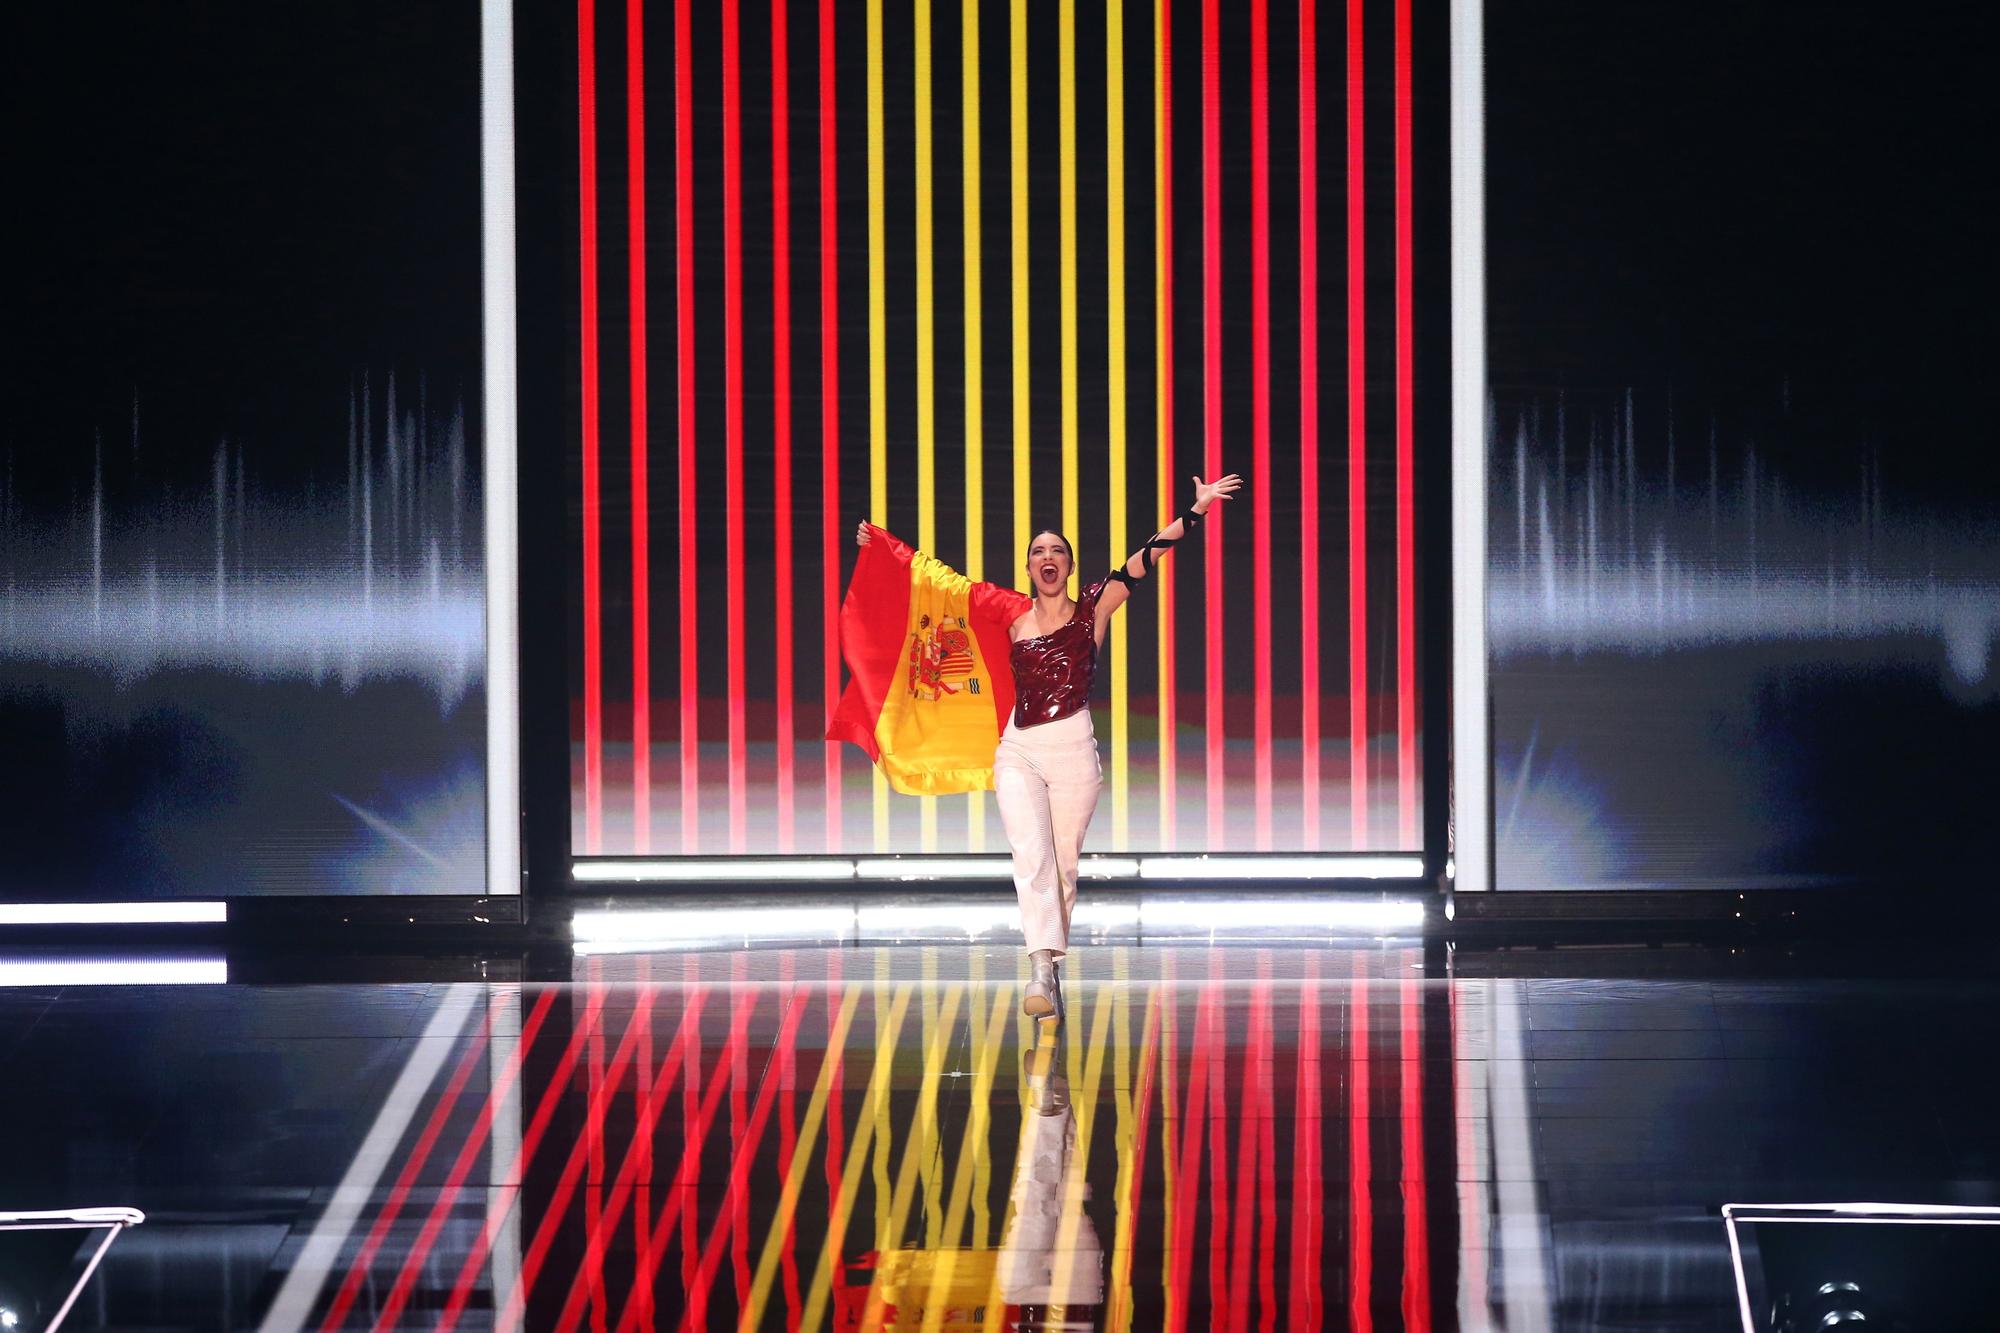 Grand Final of the 67th Eurovision Song Contest